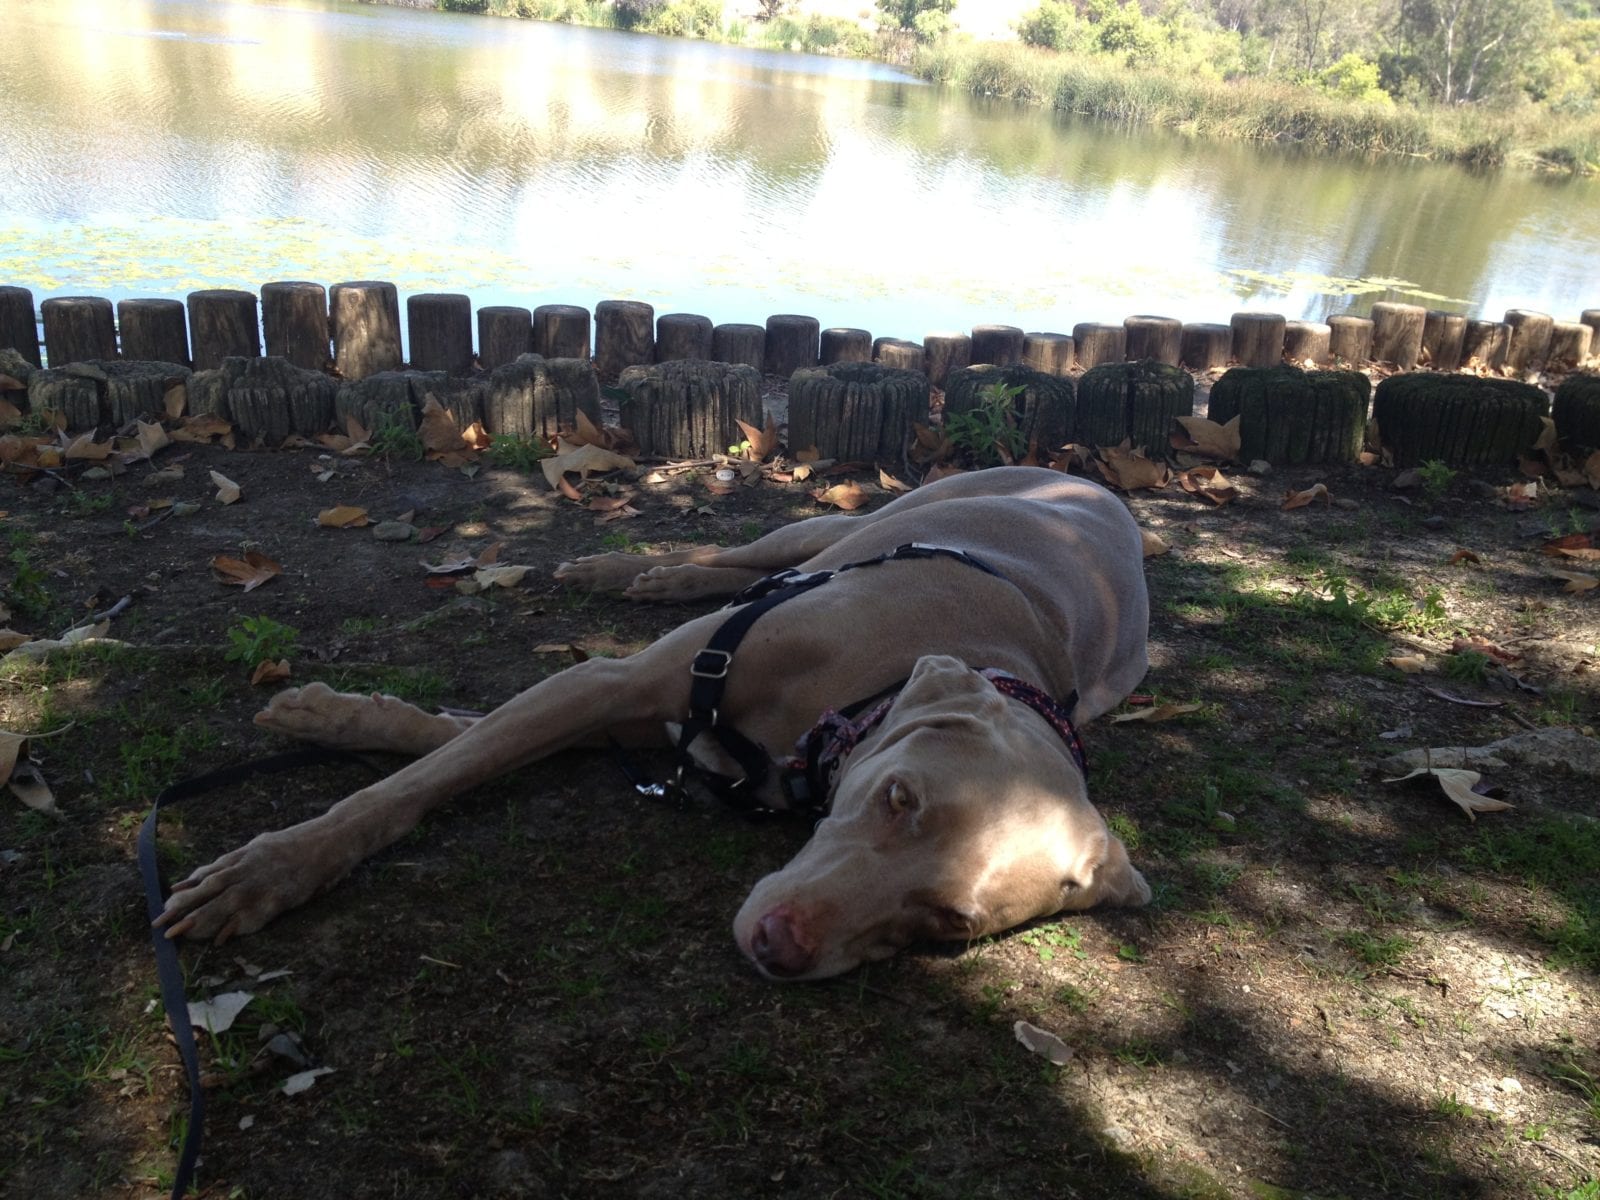 Scooby relaxing by the lake at Laguna Niguel Regional Park